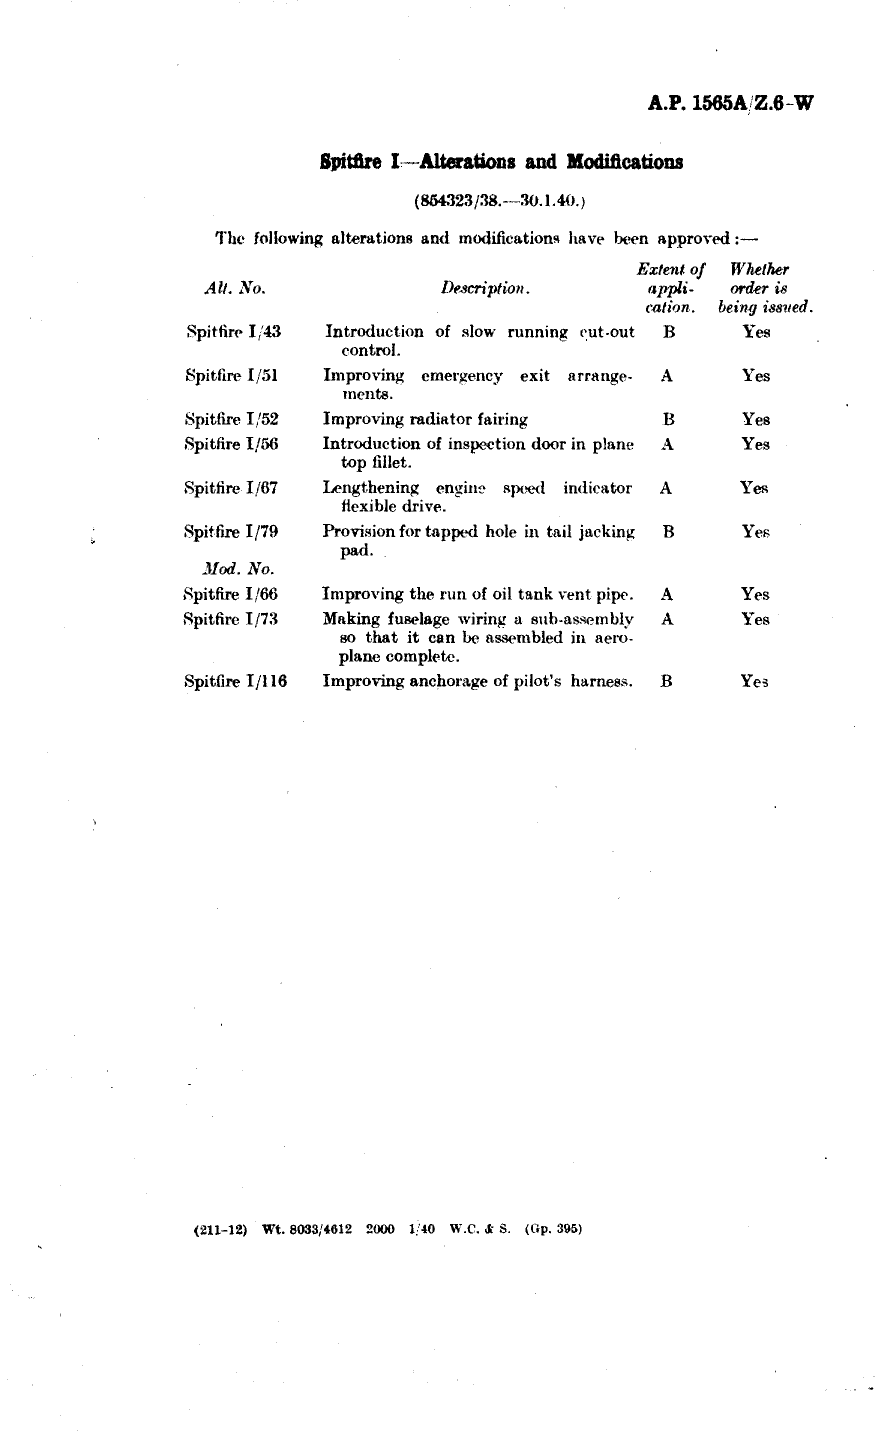 Sample page 1 from AirCorps Library document: Spitfire I Alterations and Modifications 43, 51, 52, 56, 67, 79, 66, 73 and 116